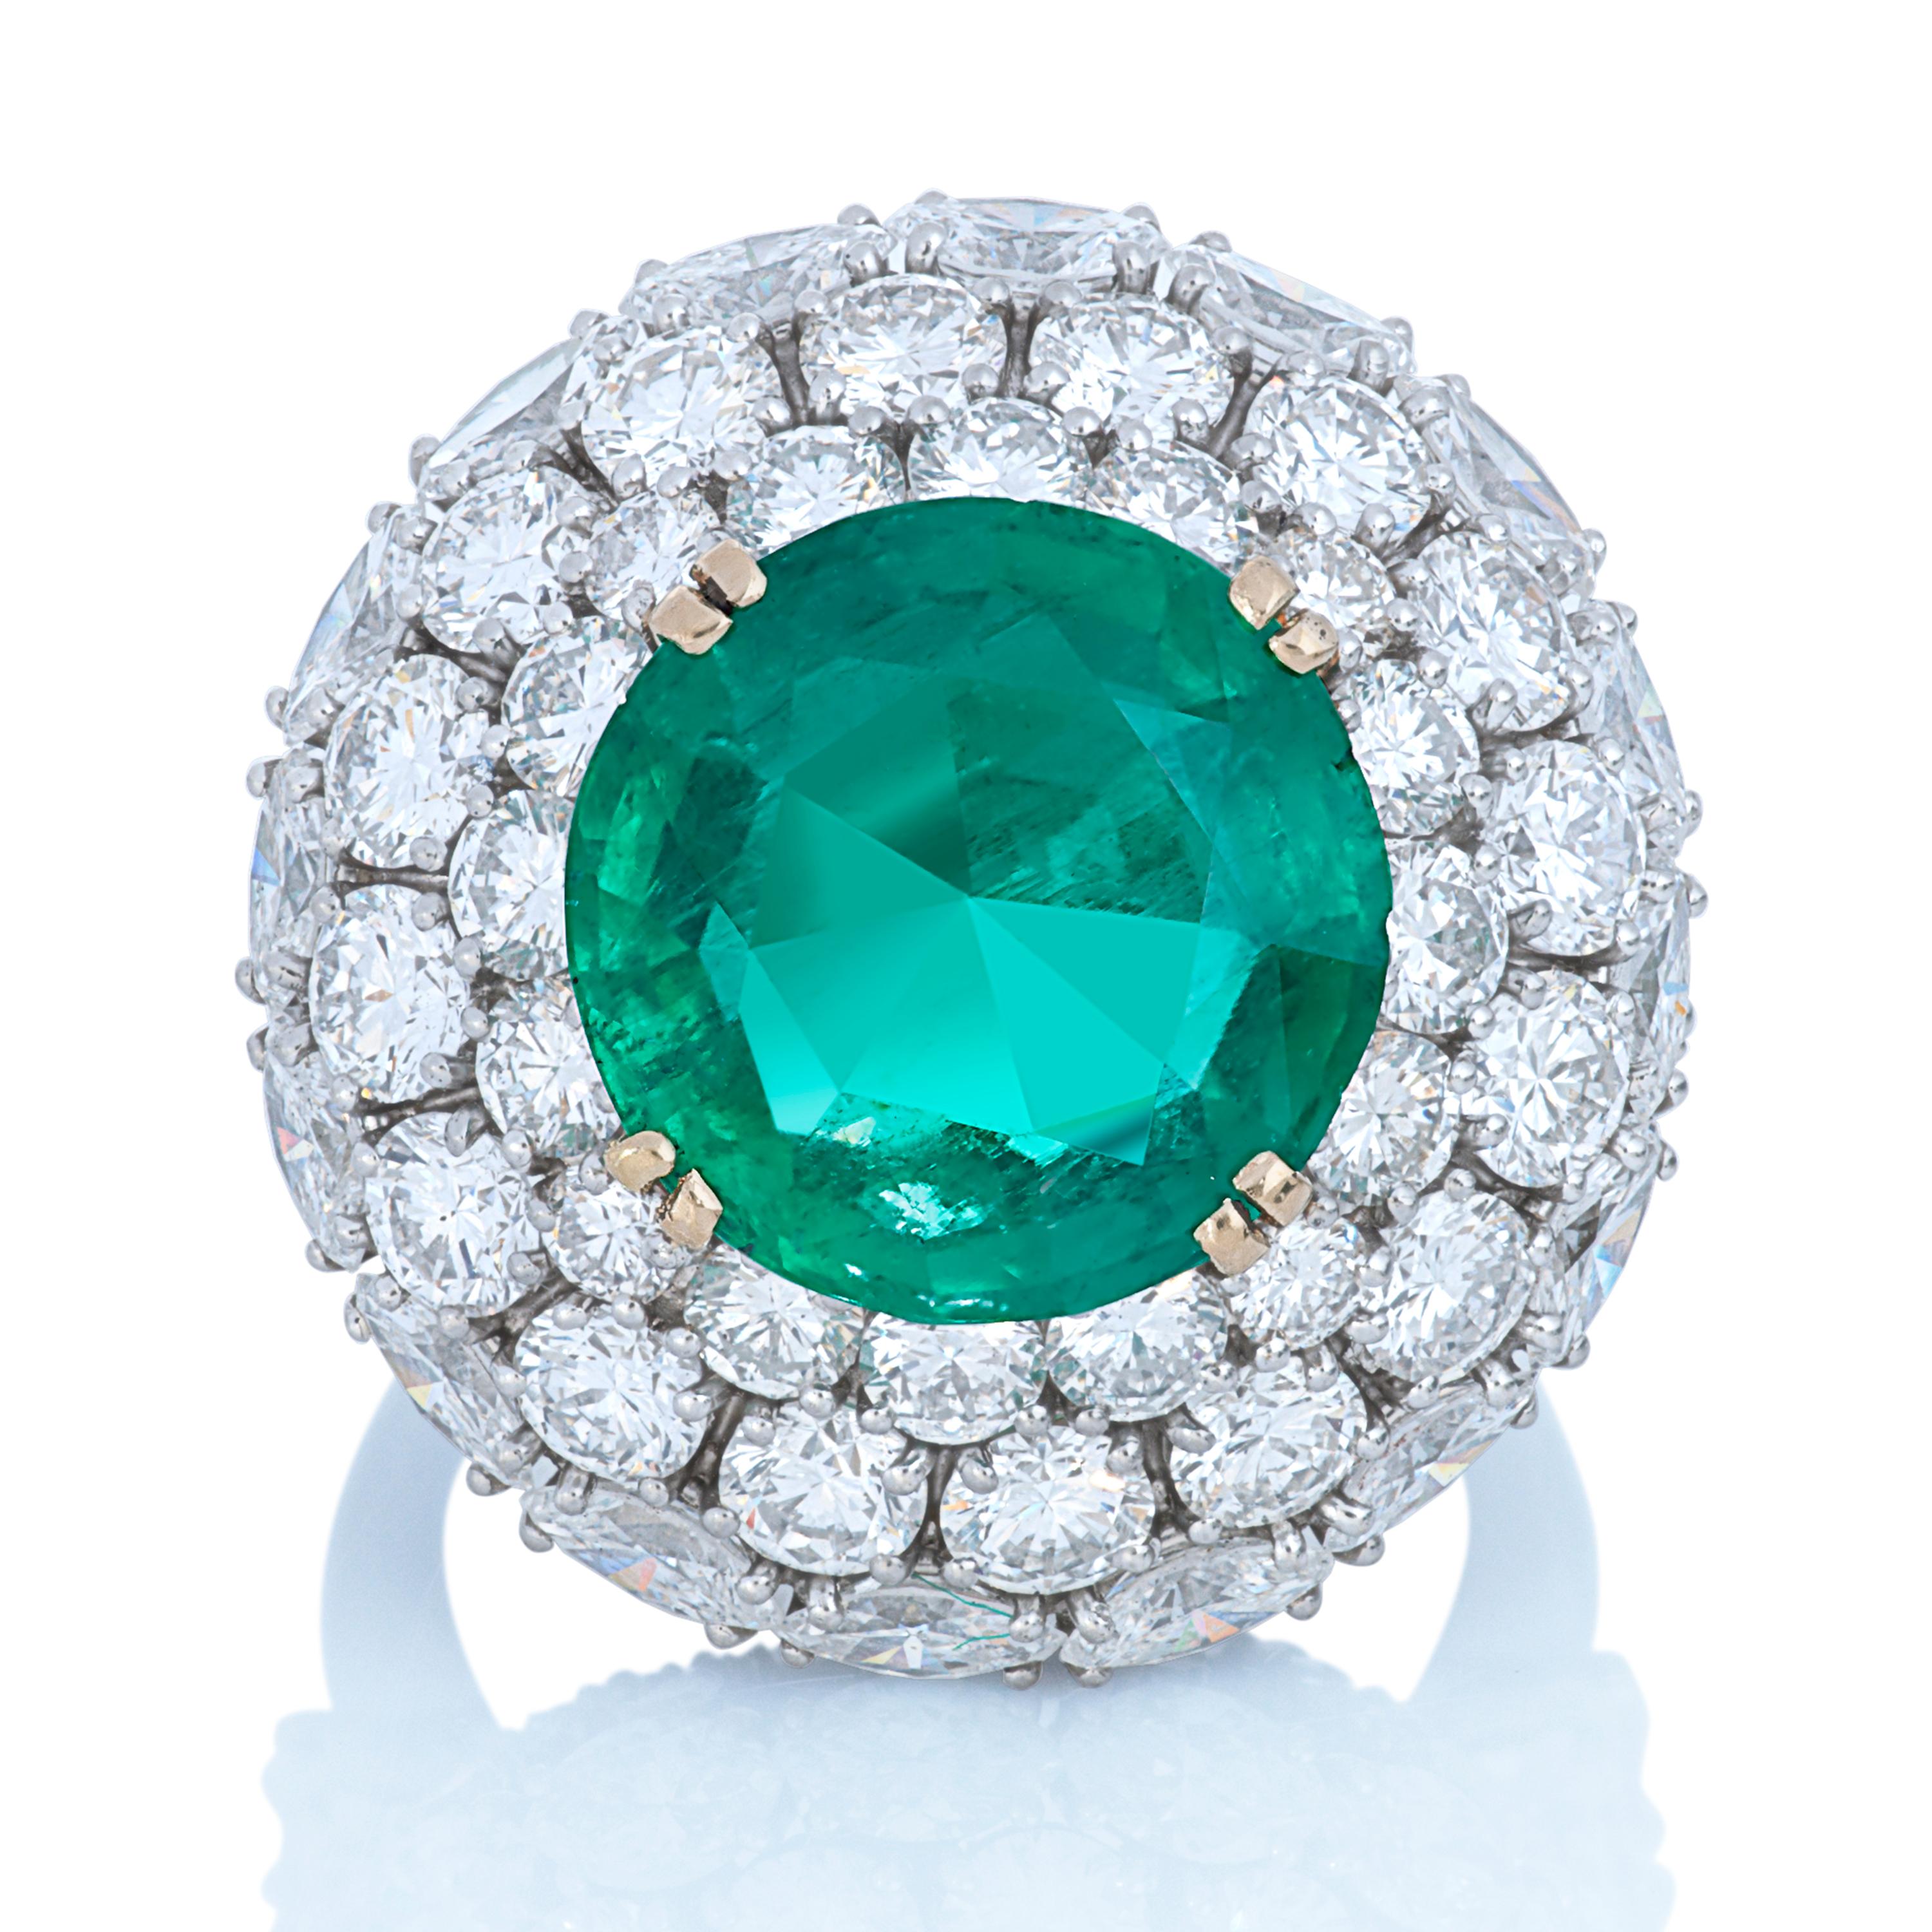 Harry Winston Colombian emerald and diamond cocktail ring with a platinum setting and 18k yellow gold prongs.  

This Harry Winston ring features a 6.81 carat round Colombian emerald accompanied by an AGL report.  The emerald is surrounded by